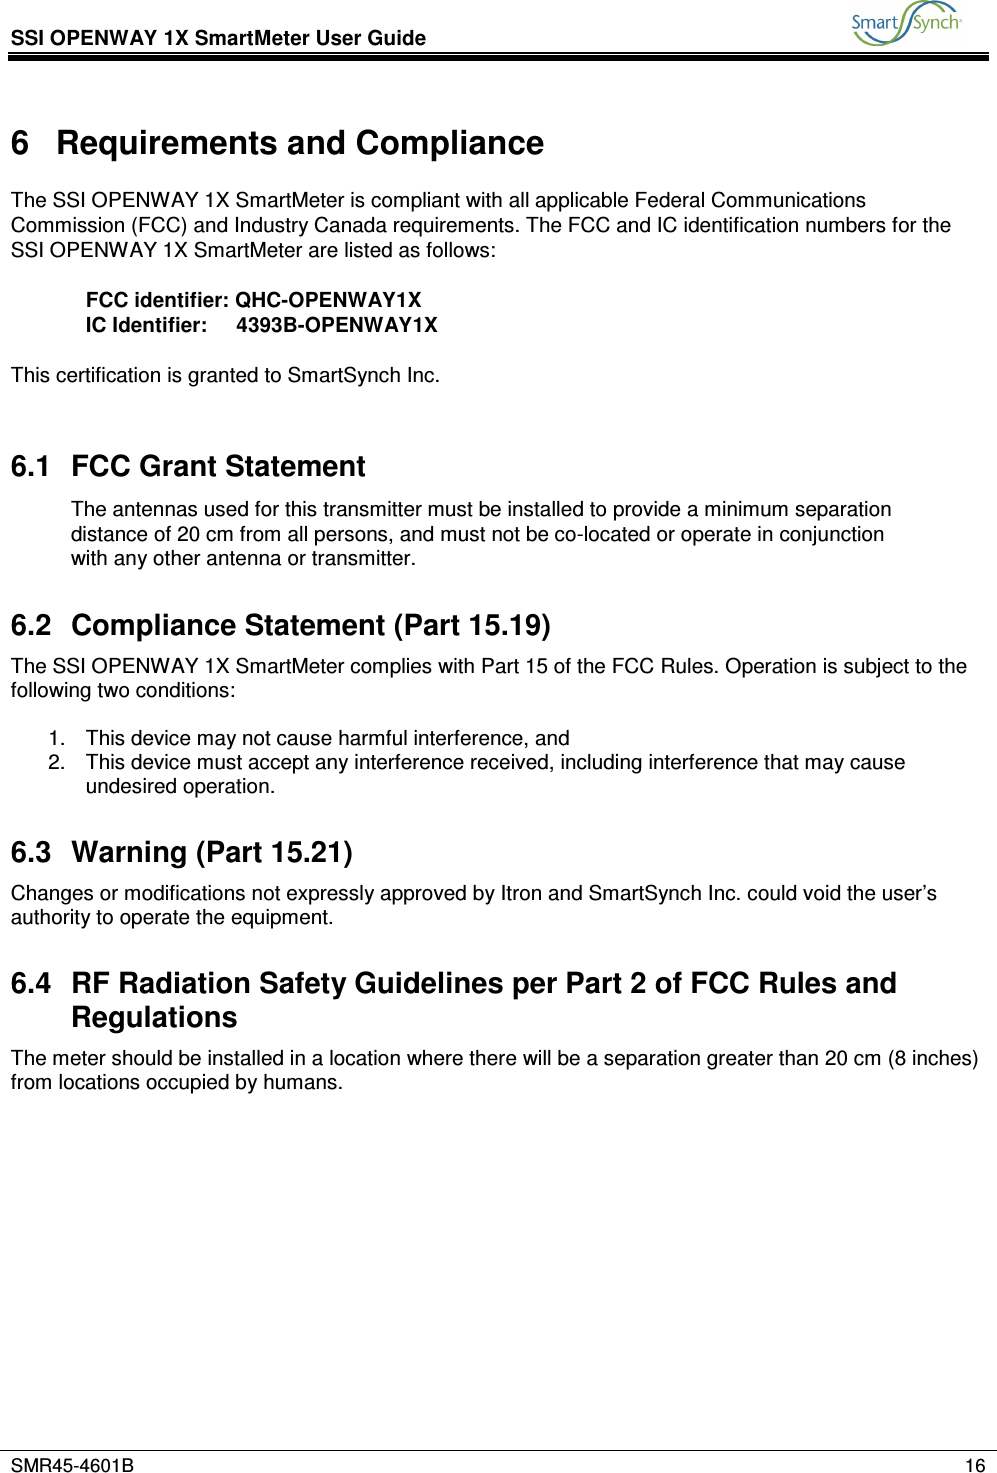 SSI OPENWAY 1X SmartMeter User Guide           SMR45-4601B    16  6  Requirements and Compliance The SSI OPENWAY 1X SmartMeter is compliant with all applicable Federal Communications Commission (FCC) and Industry Canada requirements. The FCC and IC identification numbers for the SSI OPENWAY 1X SmartMeter are listed as follows:  FCC identifier: QHC-OPENWAY1X IC Identifier:     4393B-OPENWAY1X  This certification is granted to SmartSynch Inc.  6.1  FCC Grant Statement The antennas used for this transmitter must be installed to provide a minimum separation distance of 20 cm from all persons, and must not be co-located or operate in conjunction with any other antenna or transmitter.  6.2  Compliance Statement (Part 15.19) The SSI OPENWAY 1X SmartMeter complies with Part 15 of the FCC Rules. Operation is subject to the following two conditions:  1.  This device may not cause harmful interference, and 2.  This device must accept any interference received, including interference that may cause undesired operation. 6.3  Warning (Part 15.21) Changes or modifications not expressly approved by Itron and SmartSynch Inc. could void the user’s authority to operate the equipment. 6.4  RF Radiation Safety Guidelines per Part 2 of FCC Rules and Regulations The meter should be installed in a location where there will be a separation greater than 20 cm (8 inches) from locations occupied by humans.            